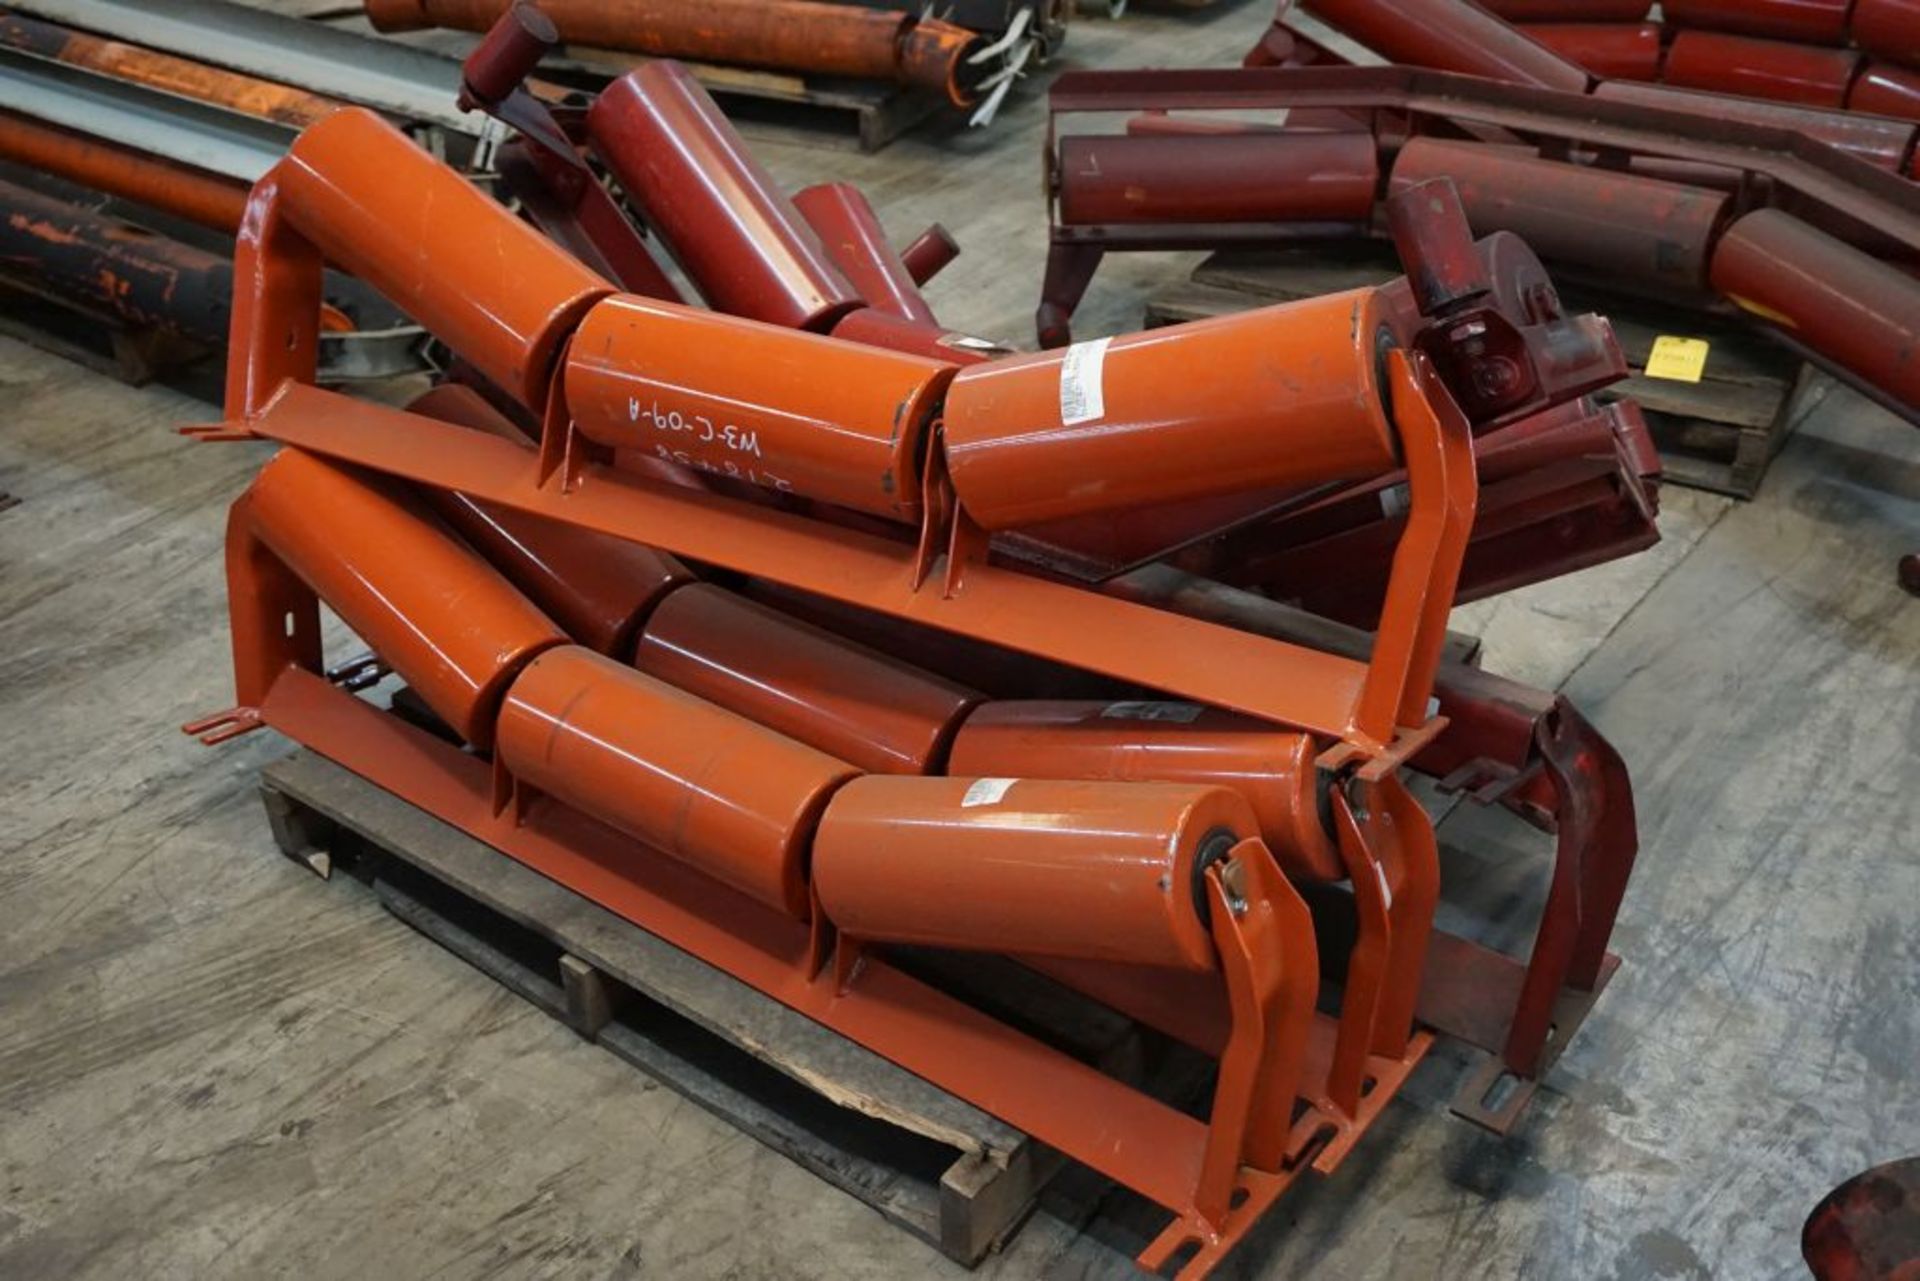 Lot of (6) 6"Diameter Impact Idlers|41" Working Width; 50" Overall Width|Lot Loading Fee: $5.00